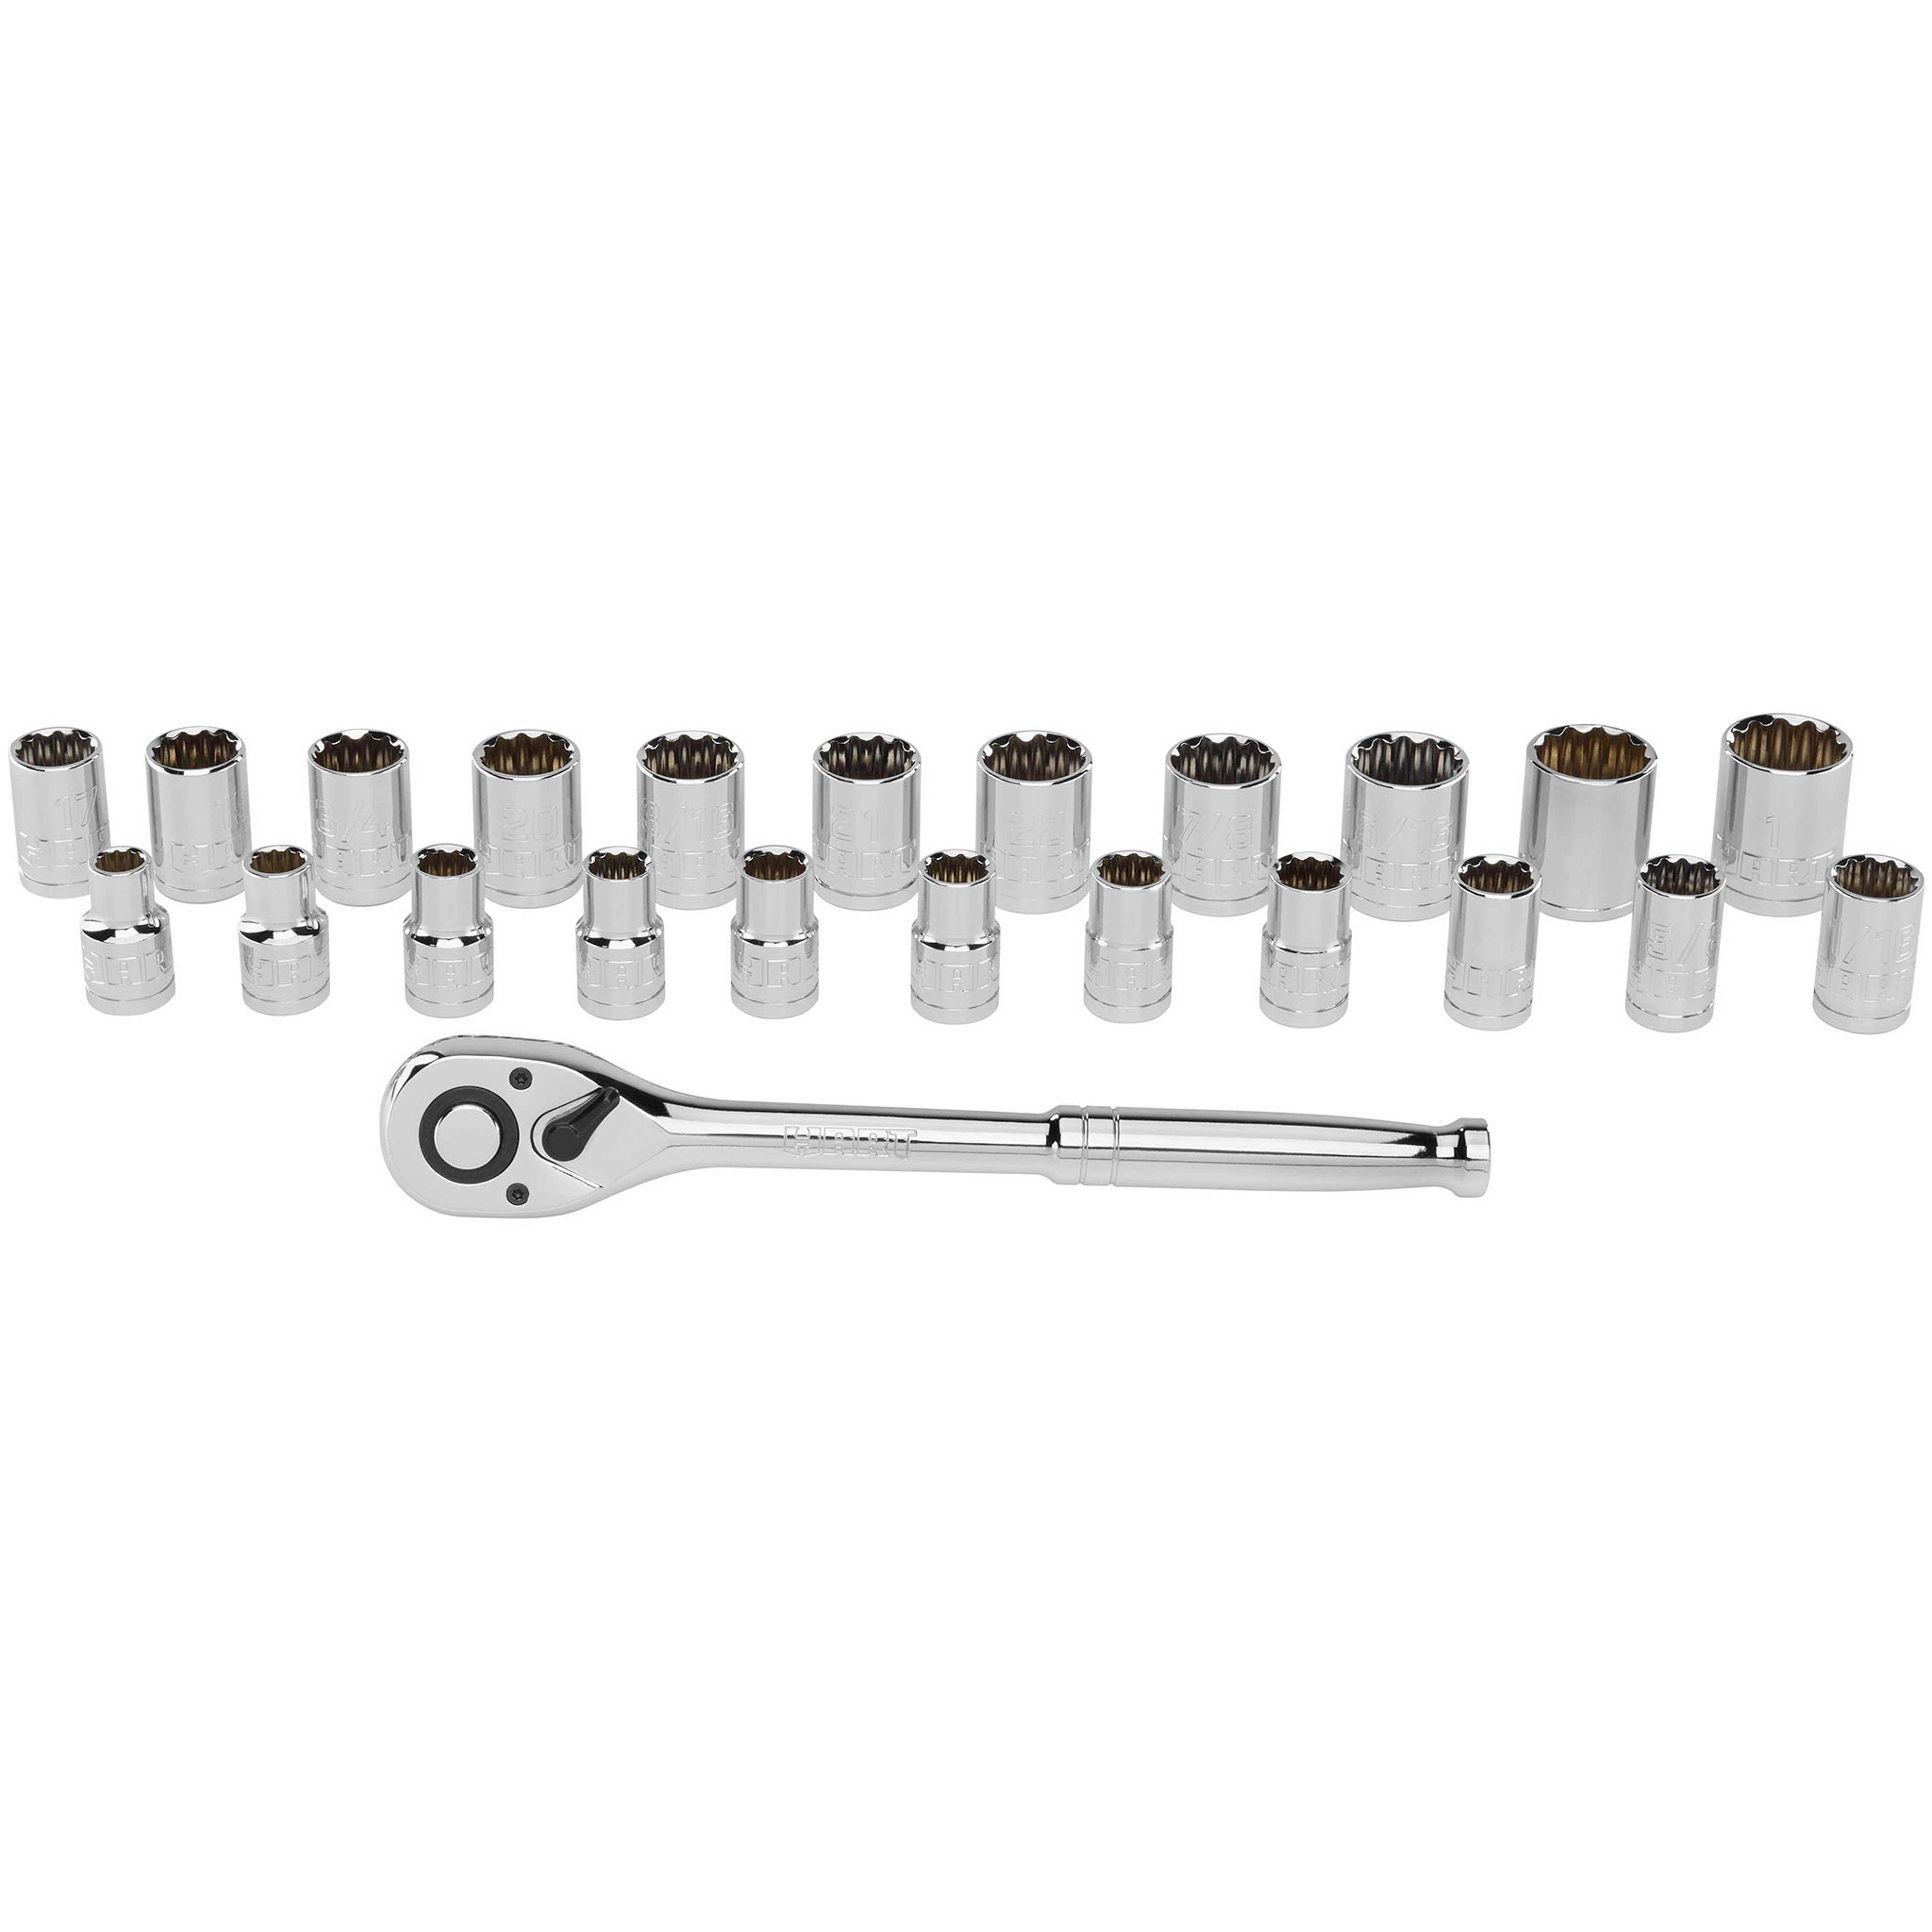 HART 23-Piece 1/2-Inch Drive Mechanics Set with Socket Wrench Ratchet and Sets, Chrome Finish - image 3 of 12